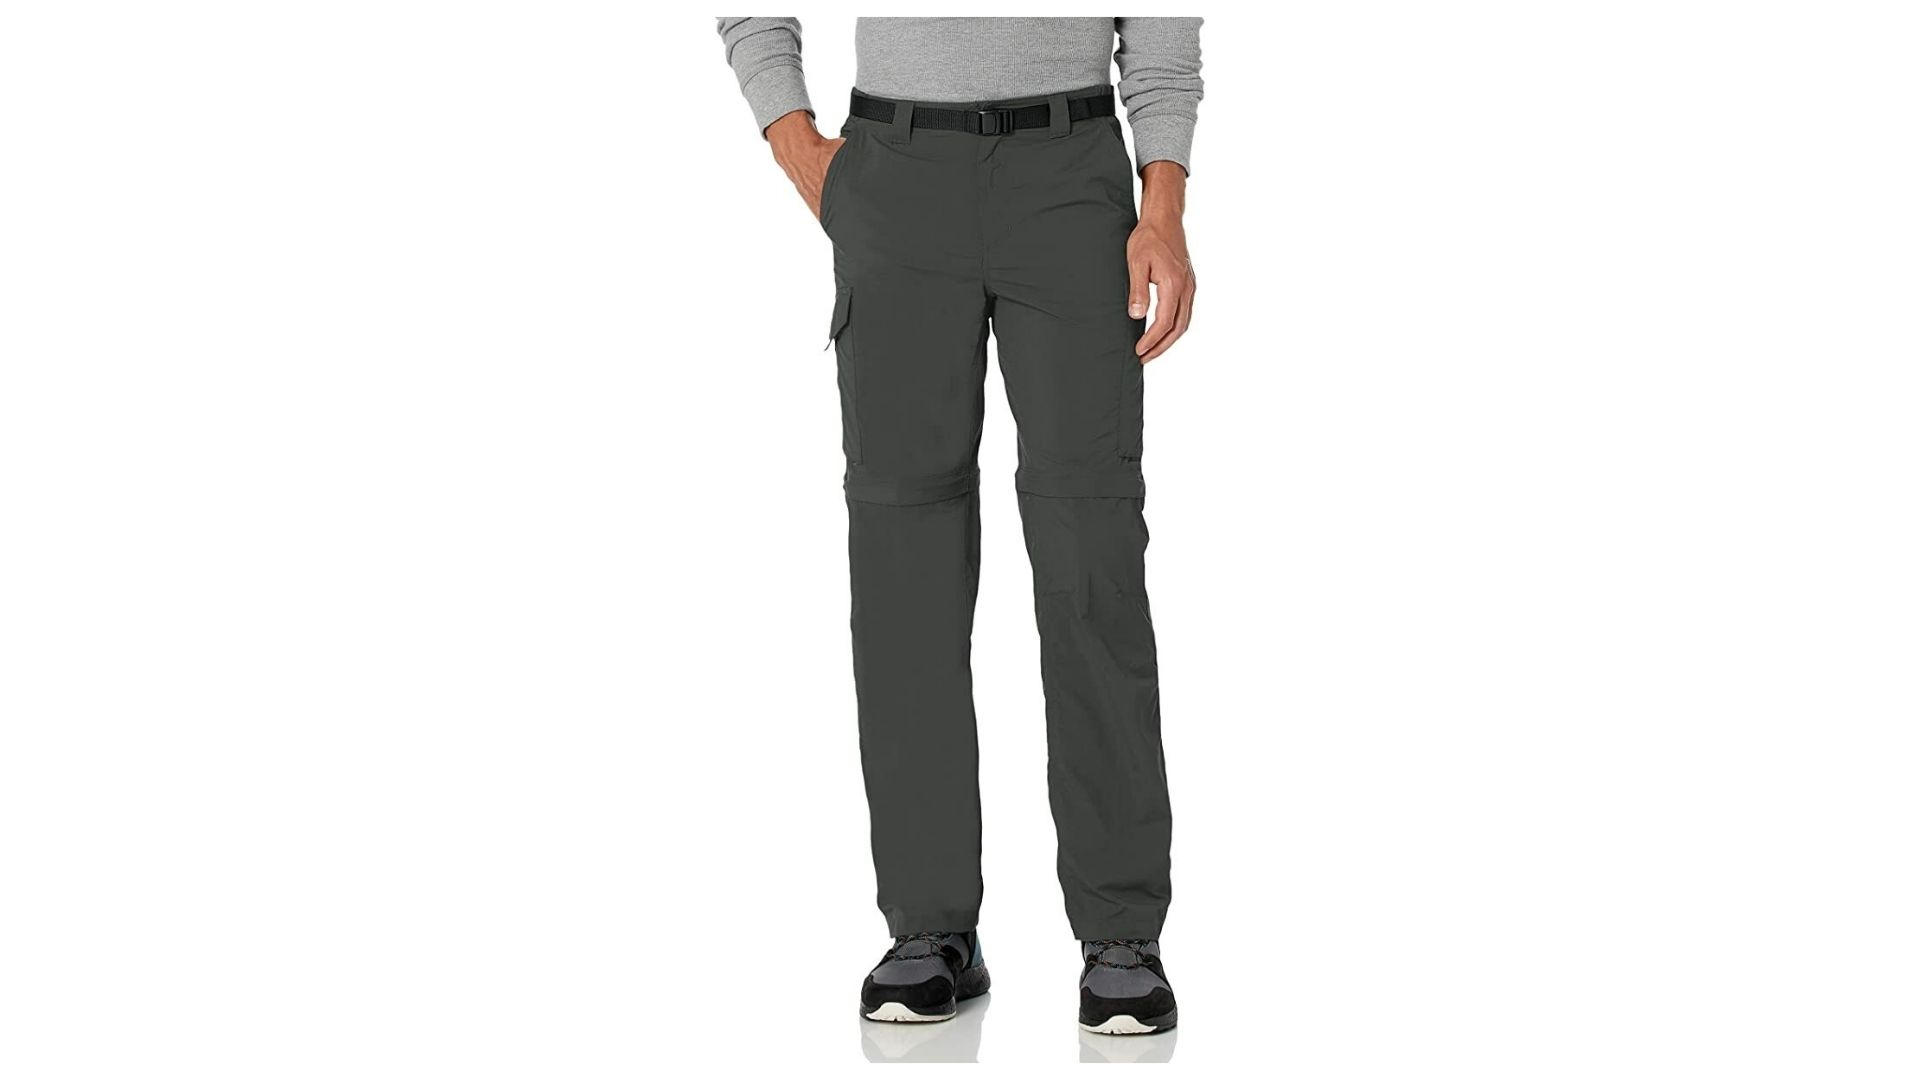 Best Hiking Pants for Men (Review & Buying Guide) in 2021 - Task & Purpose